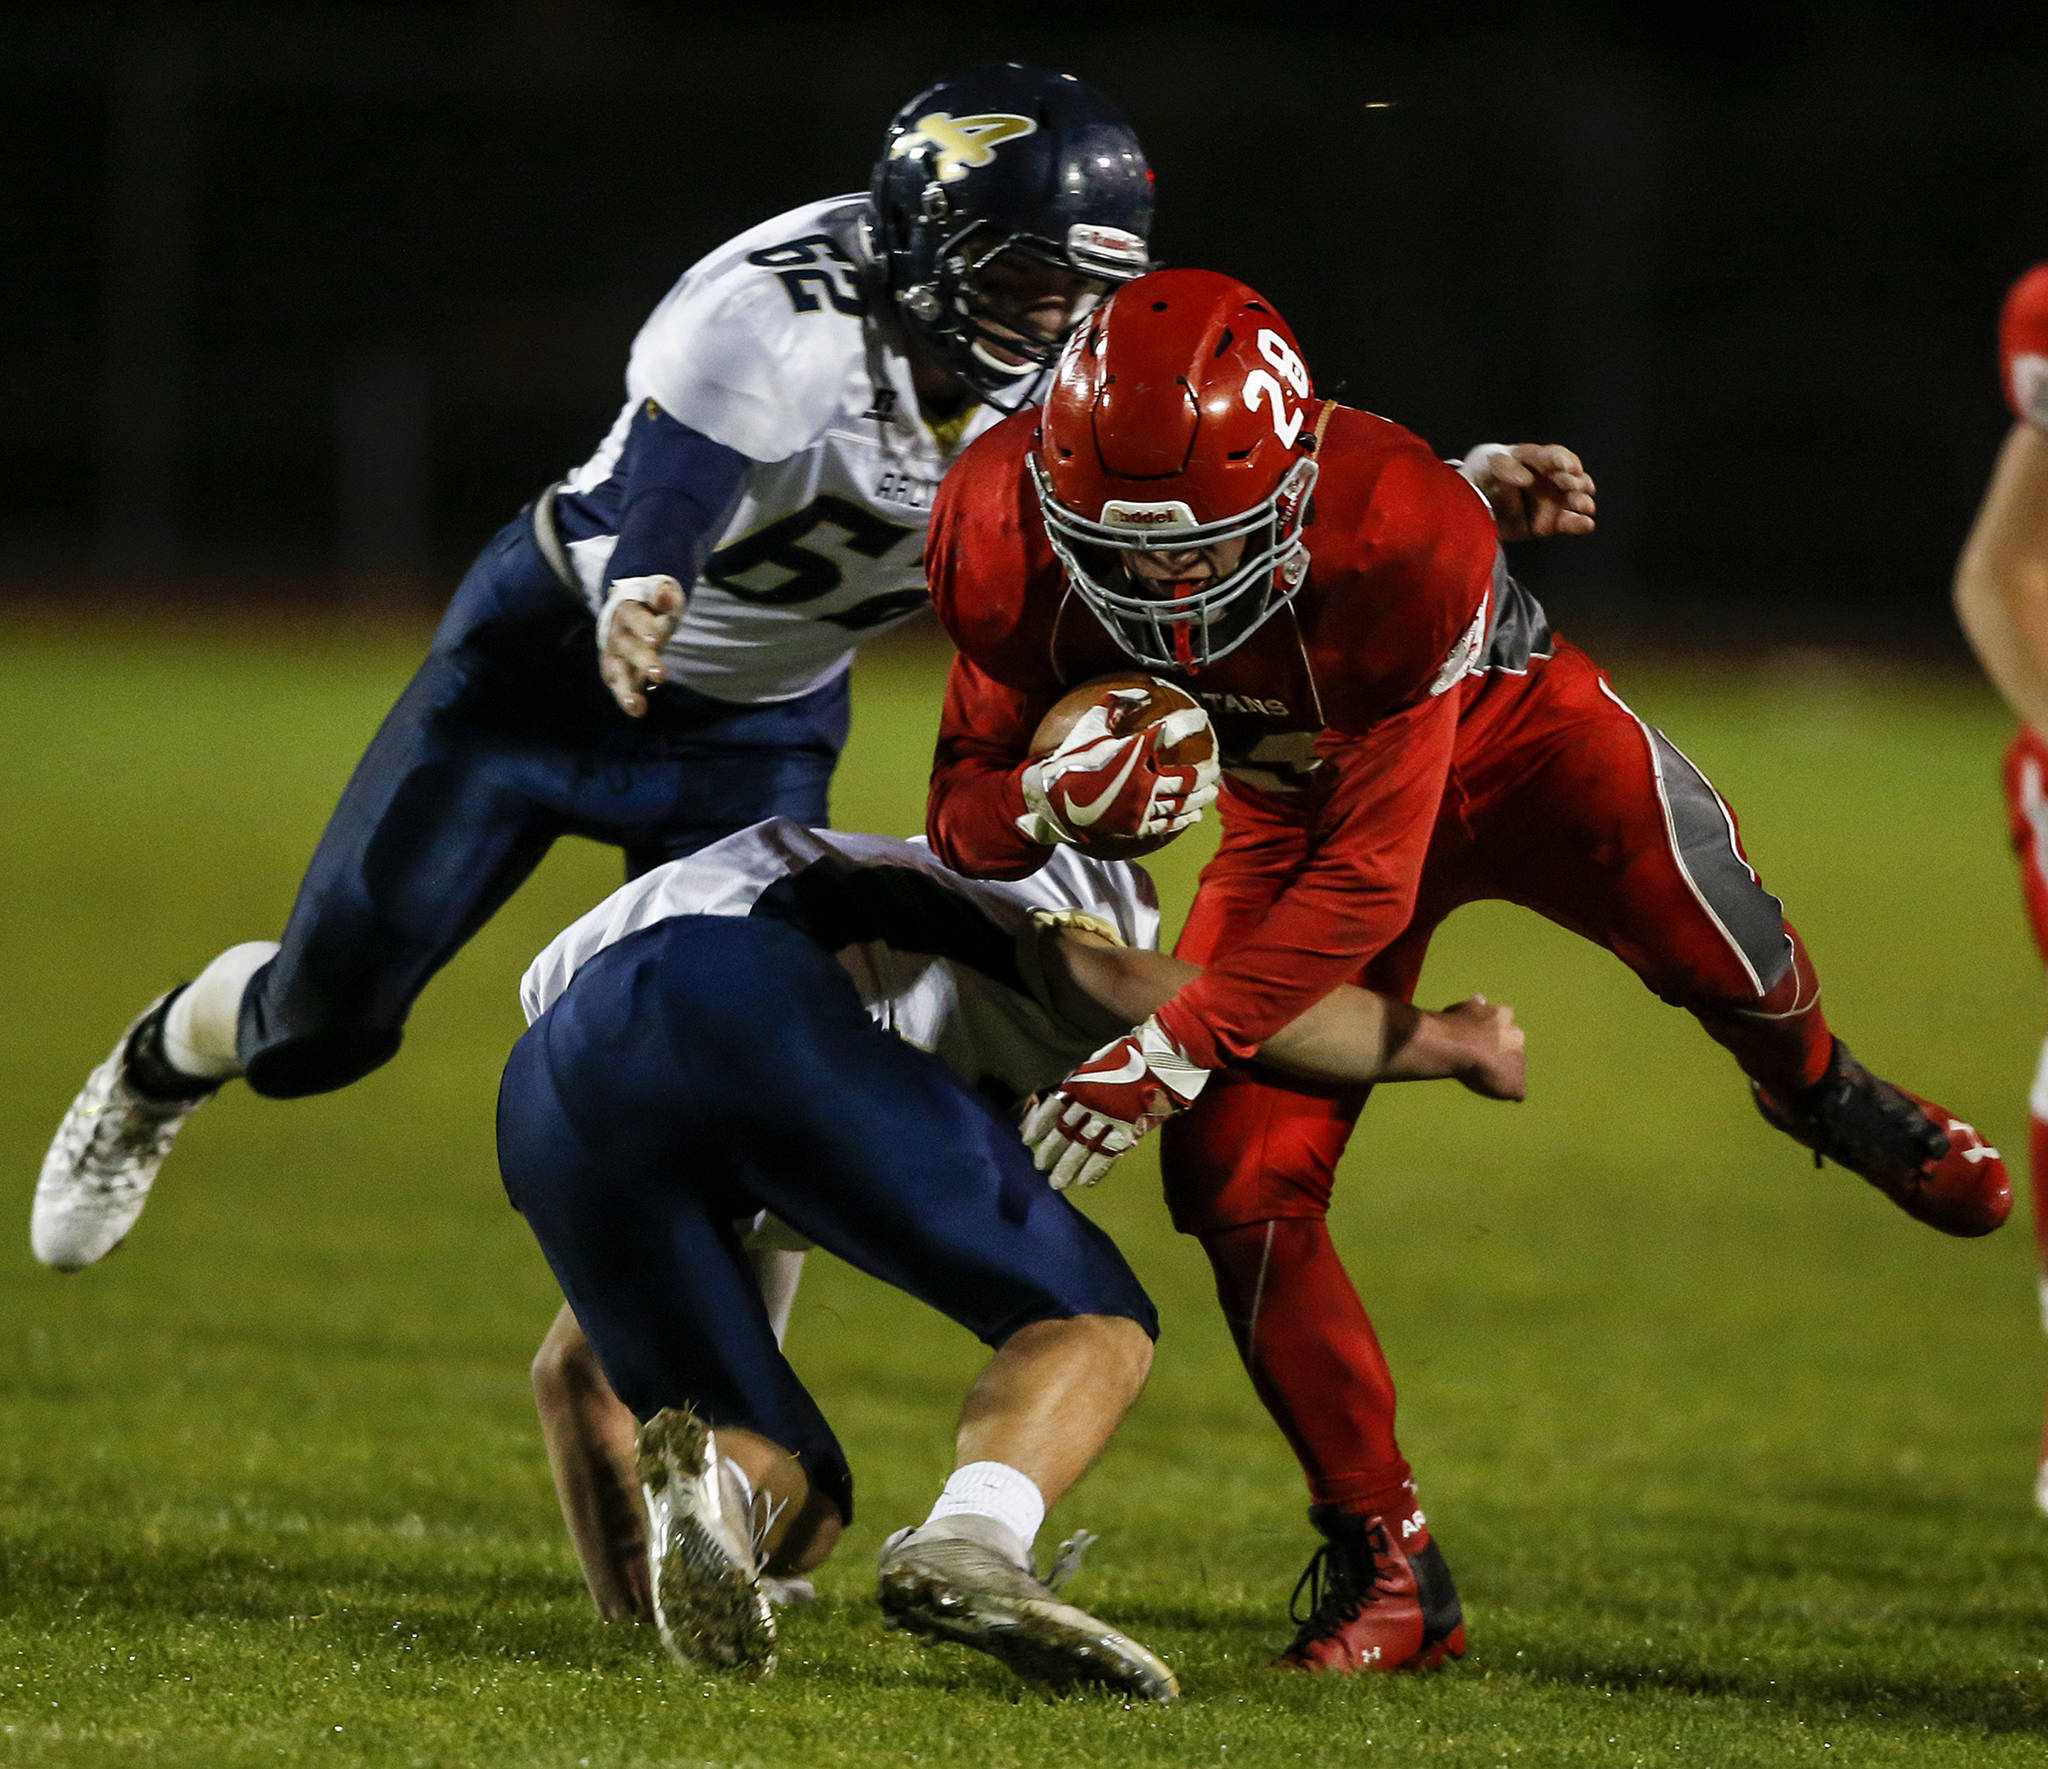 Stanwood’s Tyler Rich plows through Arlington defenders during the annual Stilly Cup game at Stanwood High School on Oct. 13, 2017. (Ian Terry / The Herald)